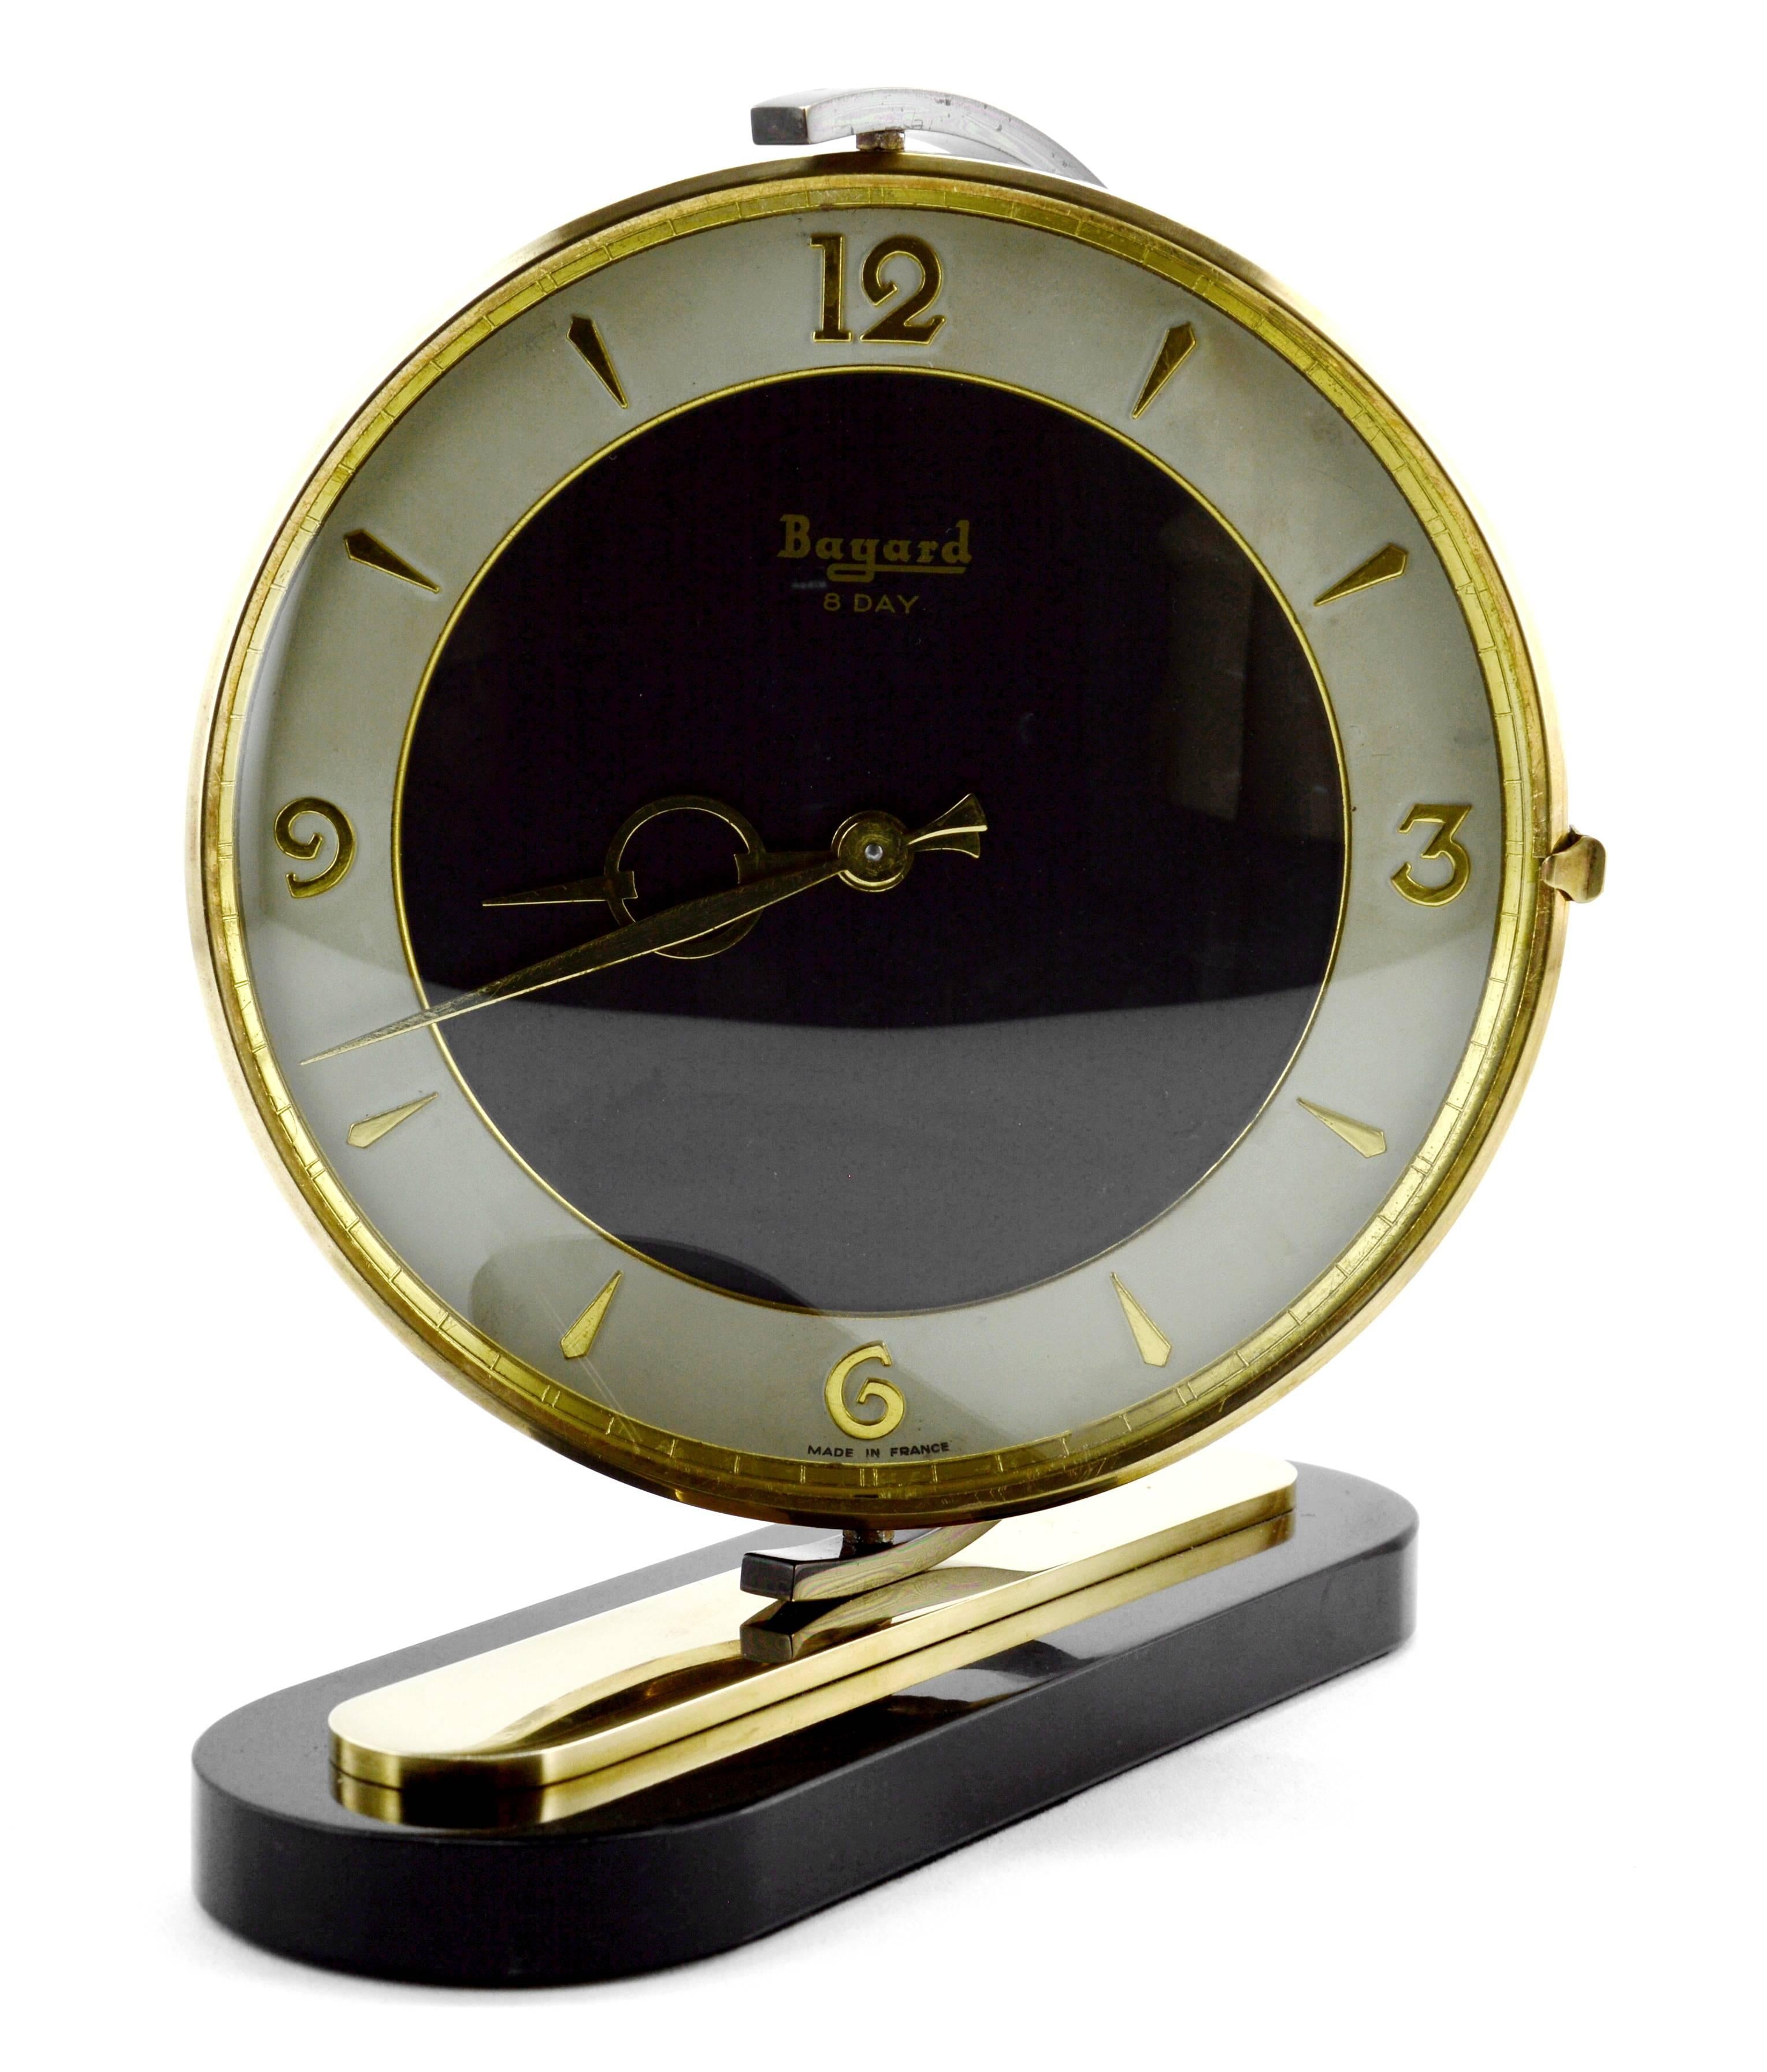 French Art Deco clock by Bayard, France, 1930s. Brass, marble and glass. Swivel brass dial. Marble base. Rounded glass. 8 days movement. Original mechanism. In perfect working order.